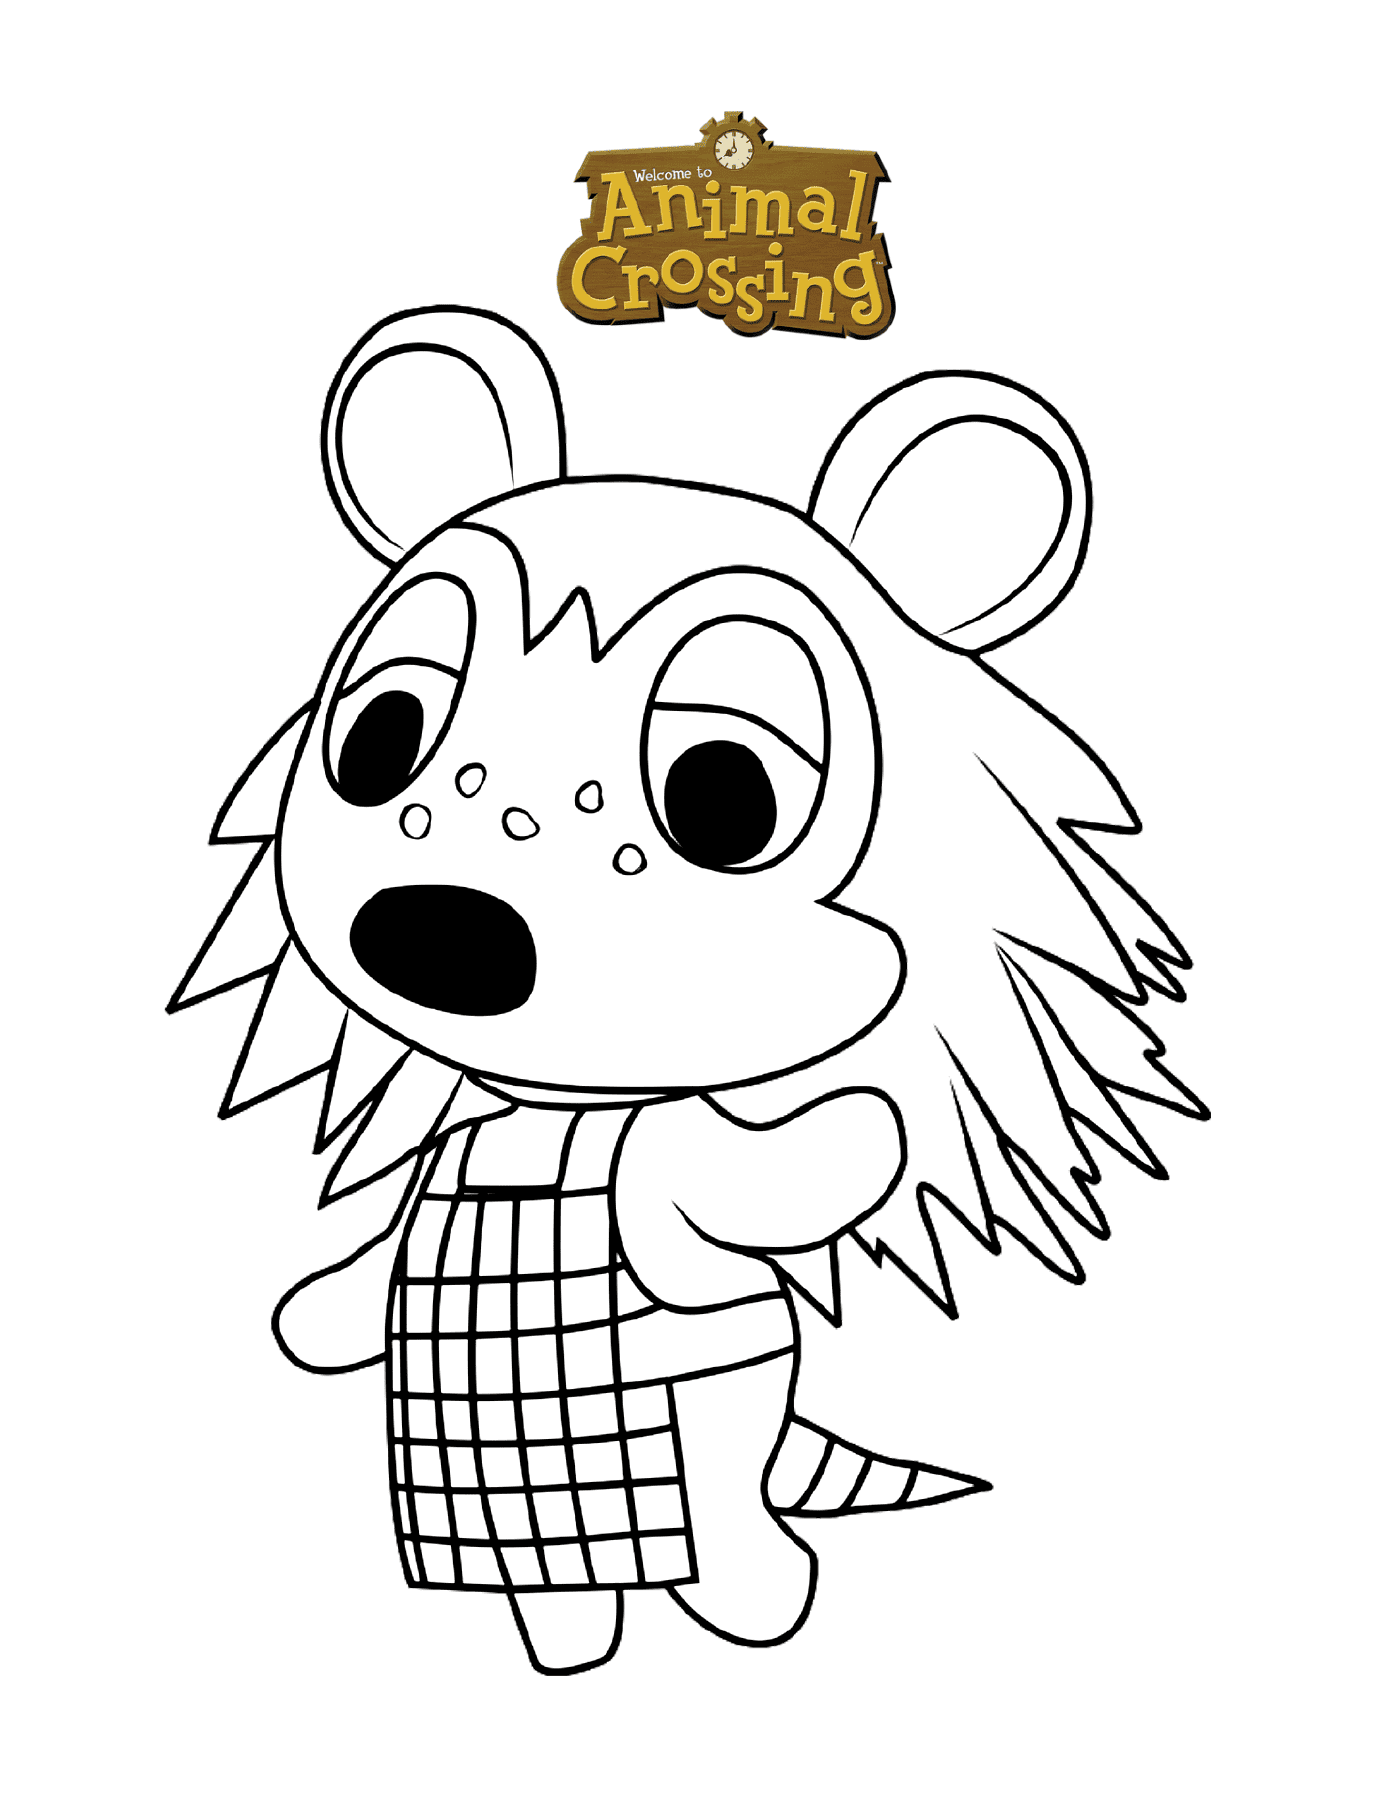  Animal Crossing sand, animal in a coloring book 